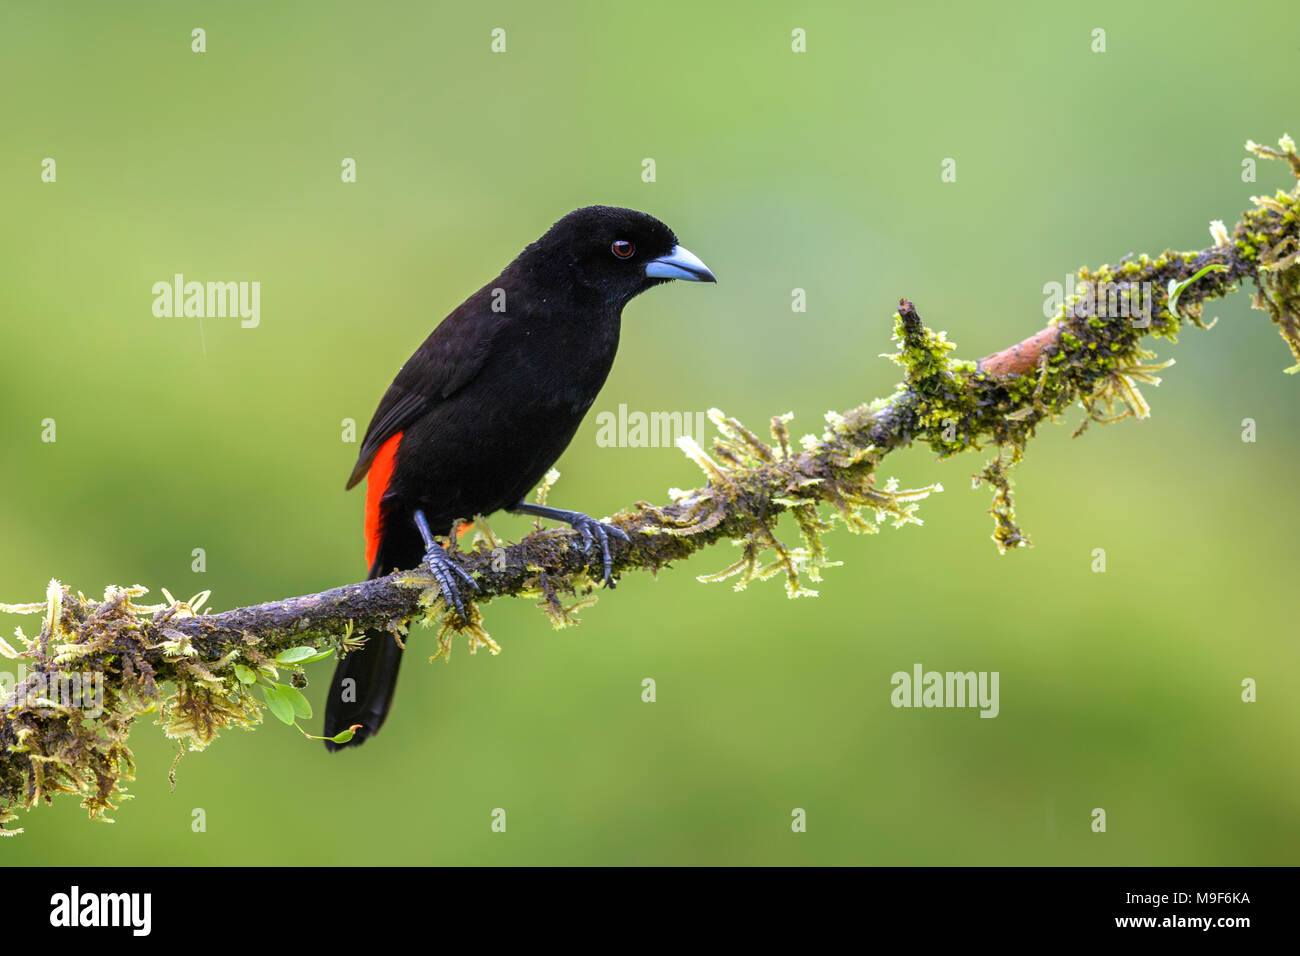 Scarlet-rumped Tanager - Ramphocelus passerinii, beatiful black and red tanager from Costa Rica forest. Stock Photo